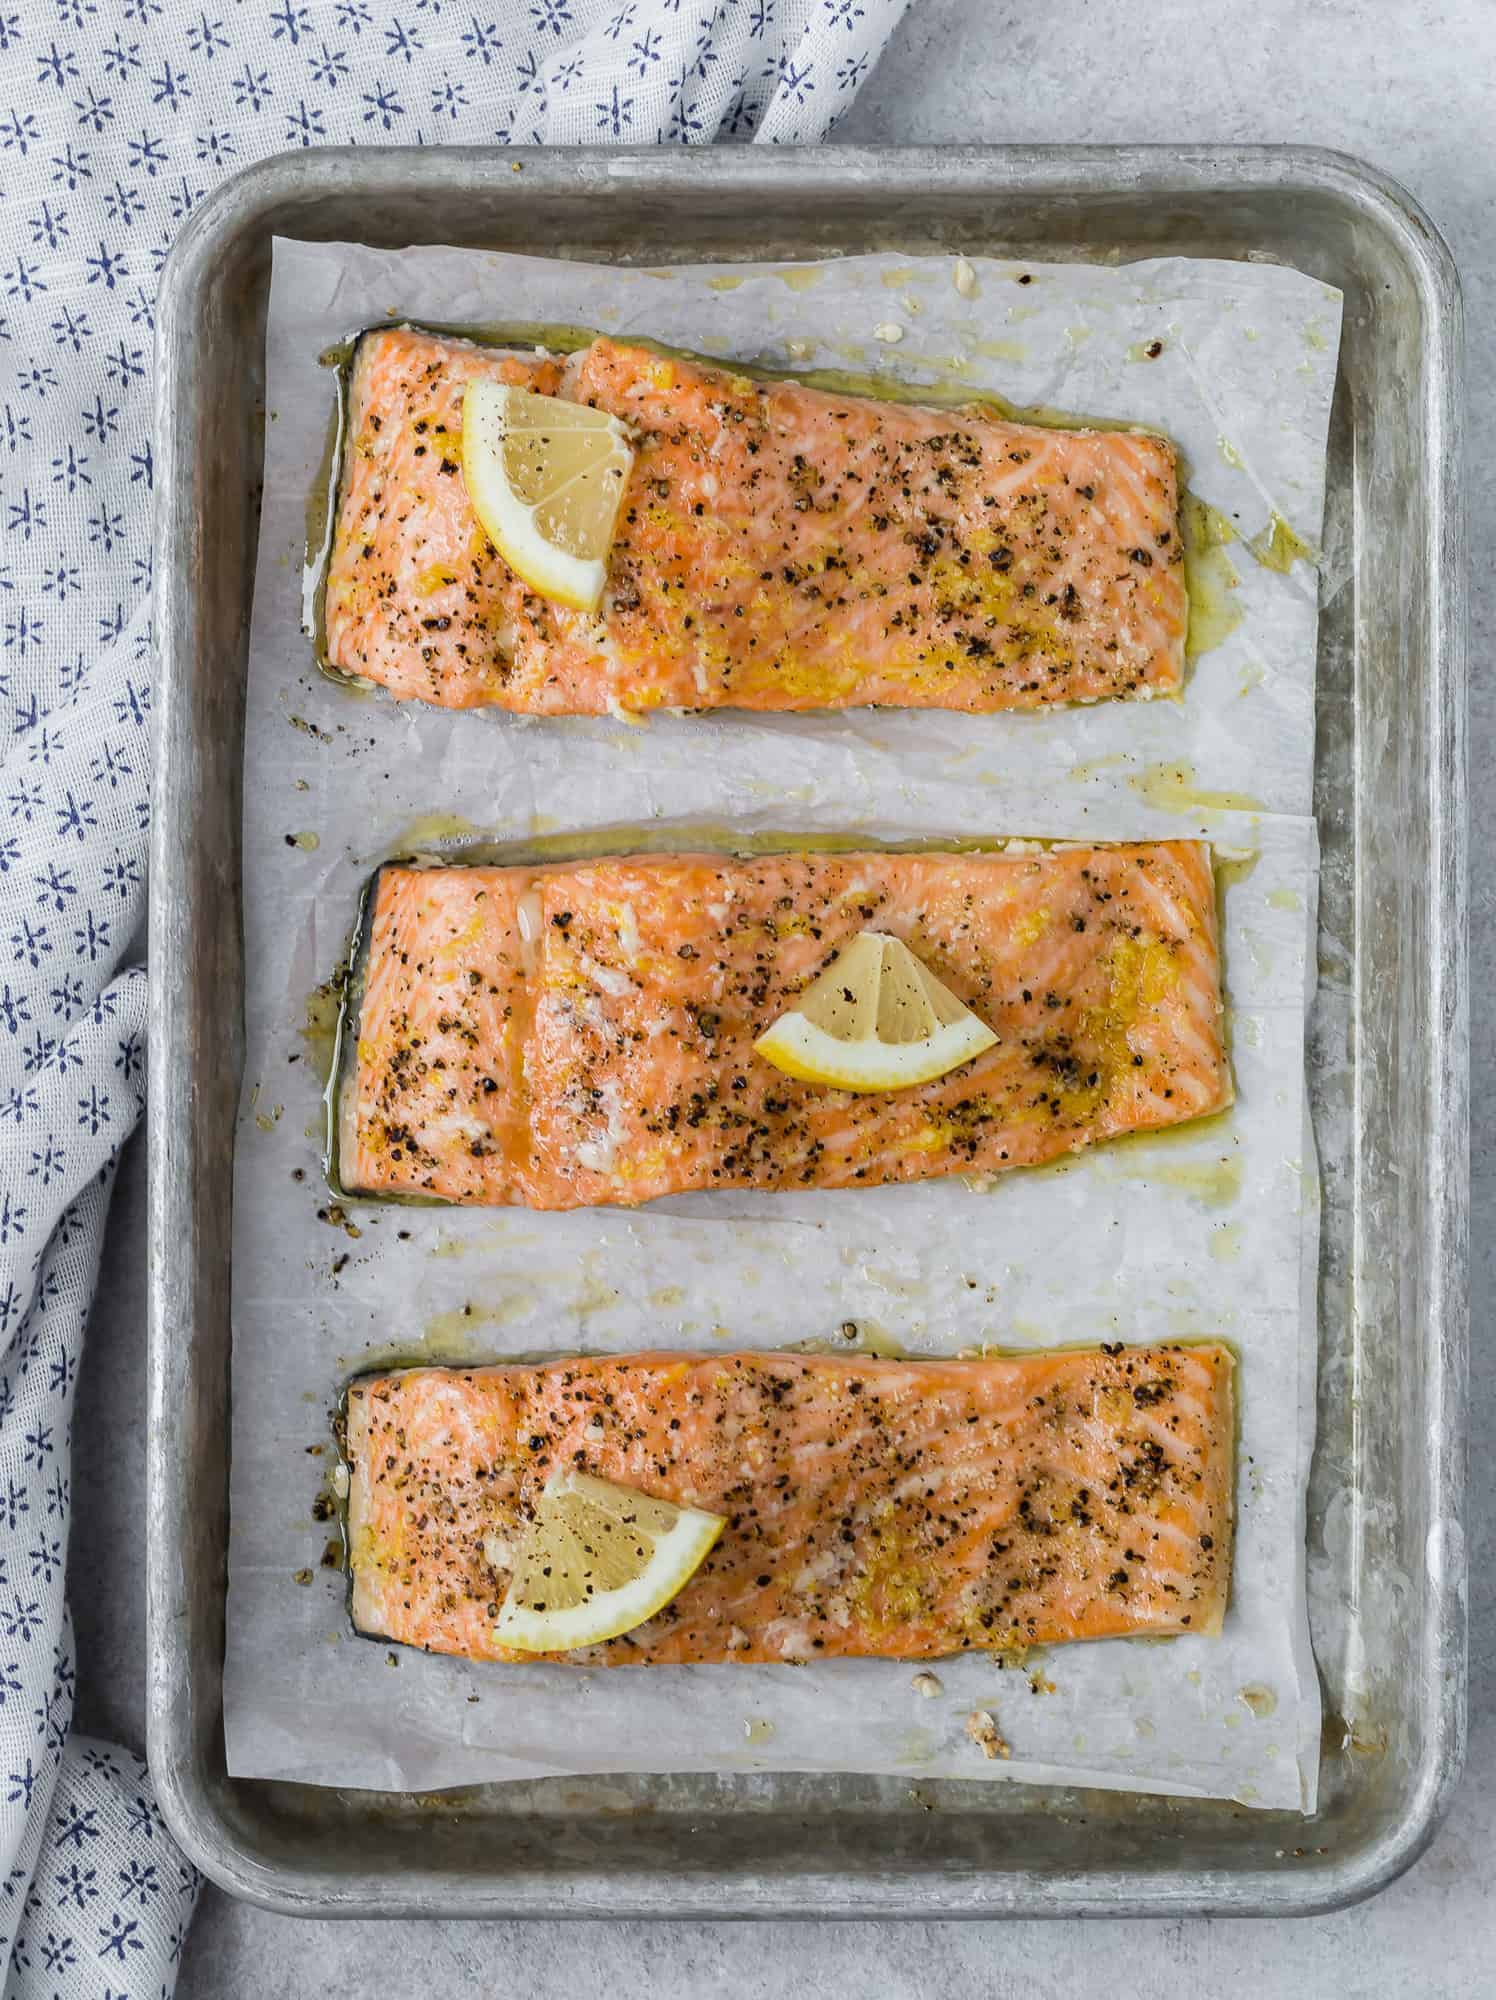 Overhead view of three salmon fillets with lemon and pepper.